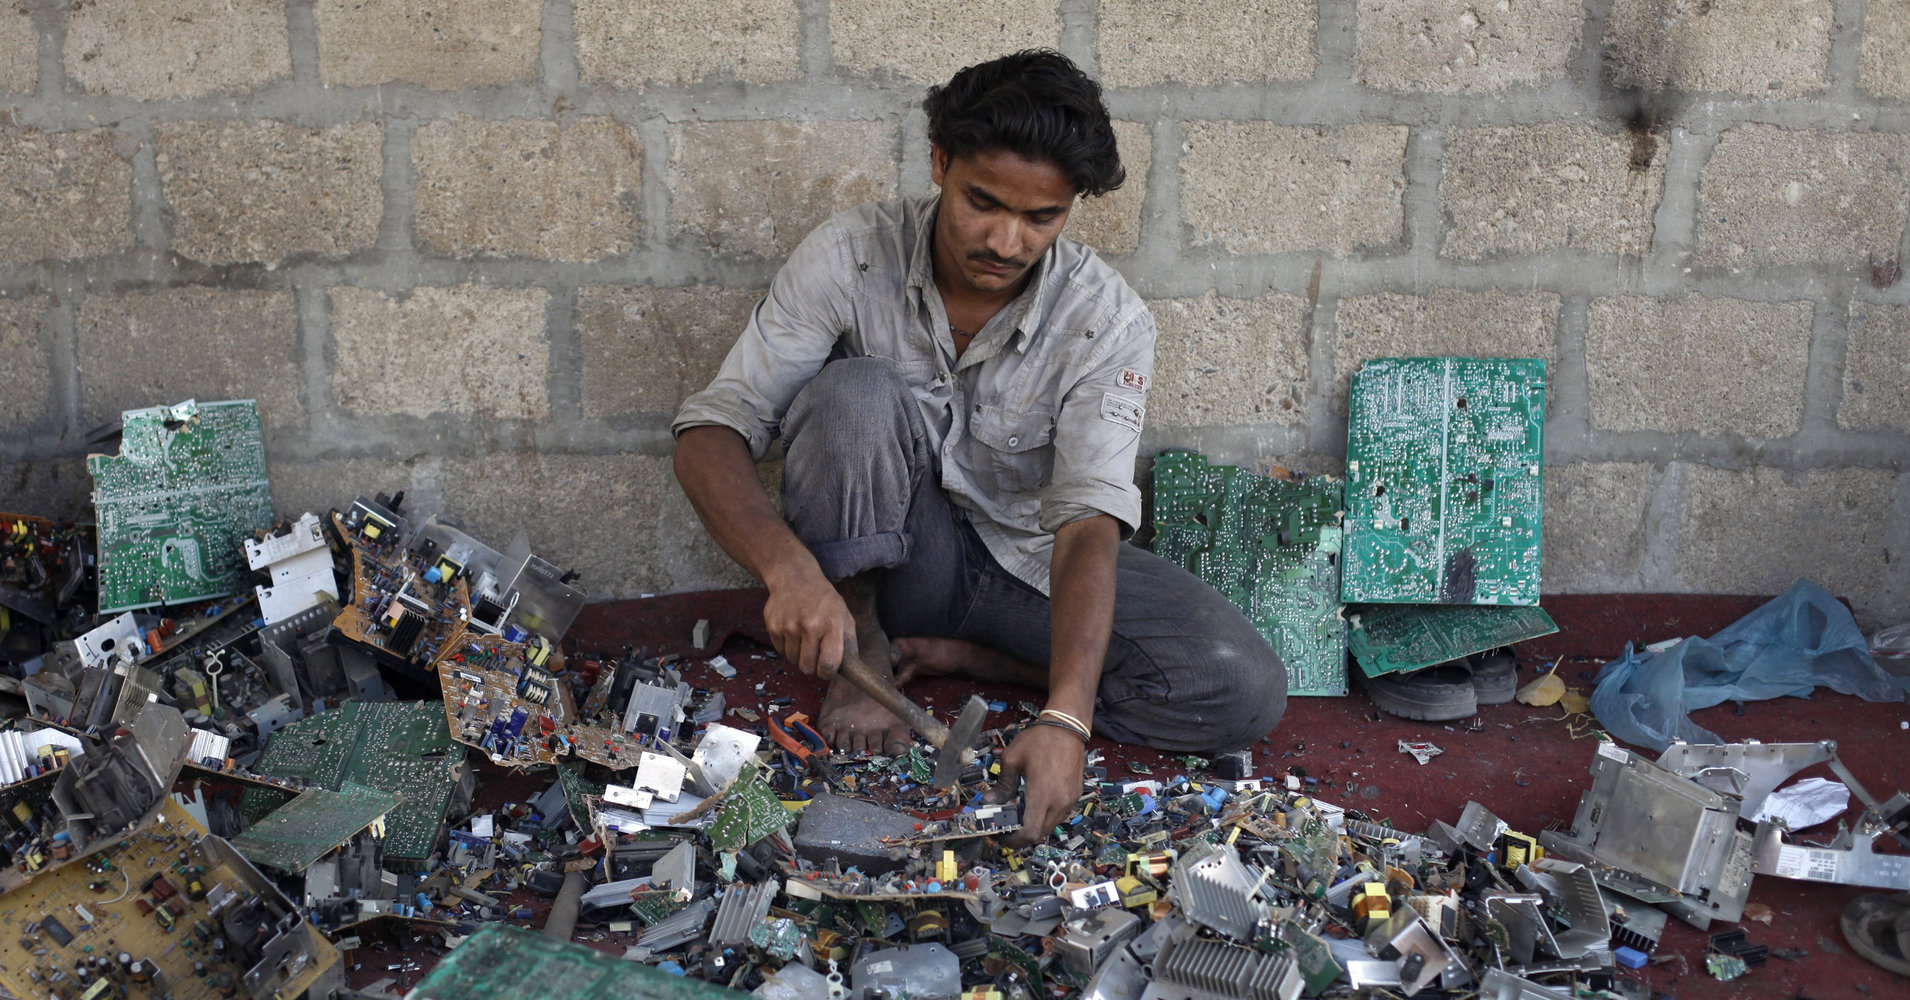 Ali Raza, 21, a scrap worker breaks a computer apart in order to retrieve metal to be used for soldering wires at a makeshift workshop in Karachi April 20, 2011. REUTERS/Athar Hussain (PAKISTAN - Tags: SOCIETY BUSINESS)